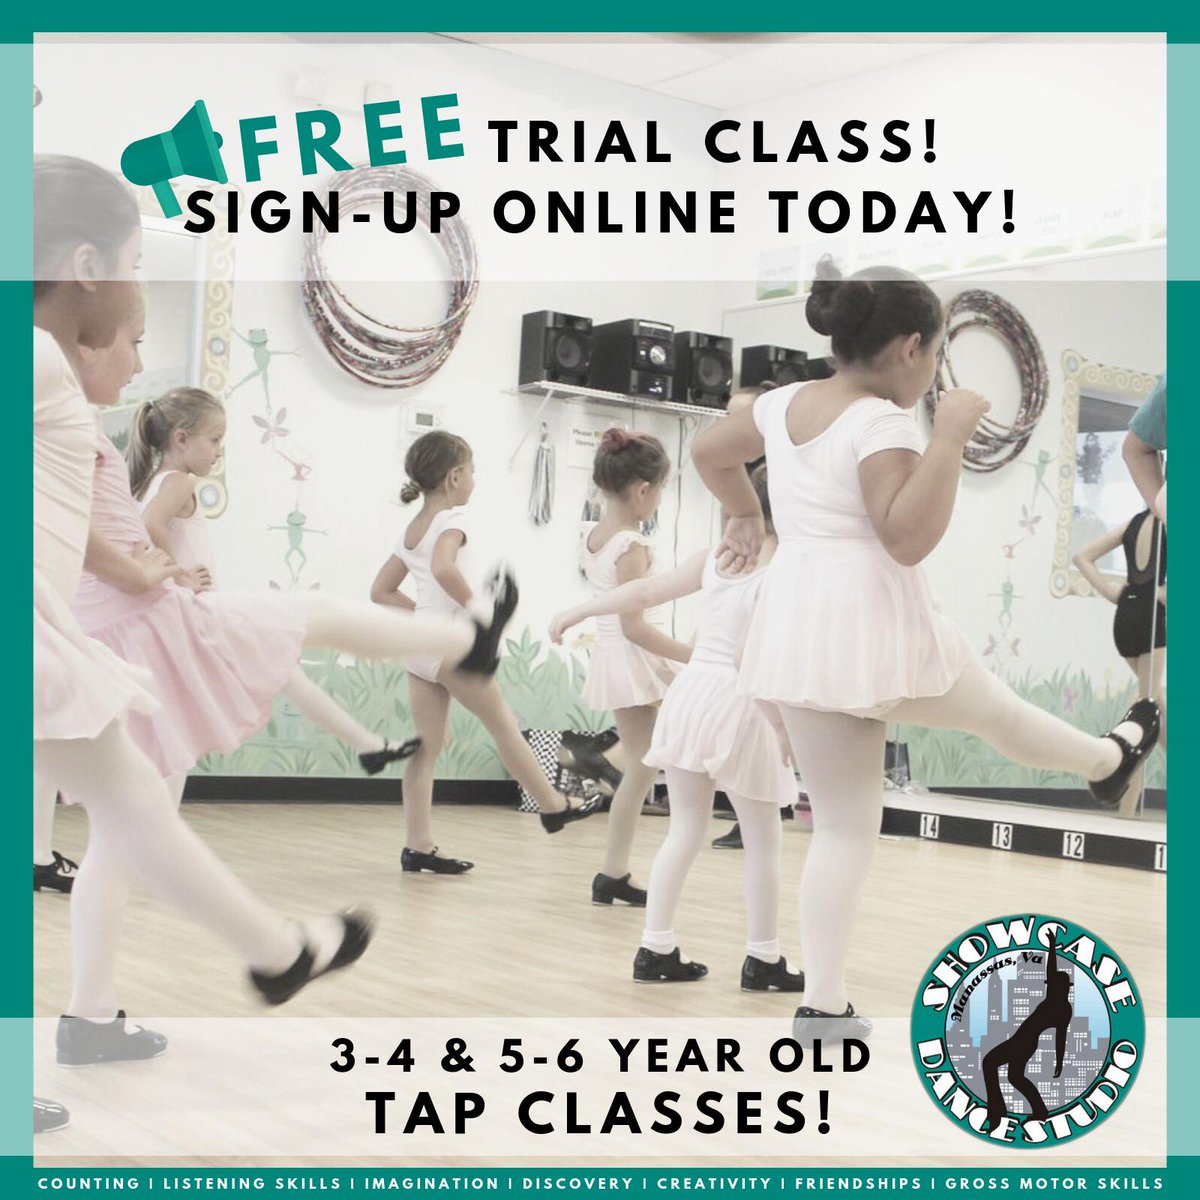 Does your friend have a younger sibling who loves to dance?! Spread the word! Tap class at SDS is where it's at! #tapdanceclass #tapclasses #kidsdanceclasses #showcasedancestudio #sdsfamily #joinus
showcase.dance/registration/3…
showcase.dance/registration/5…